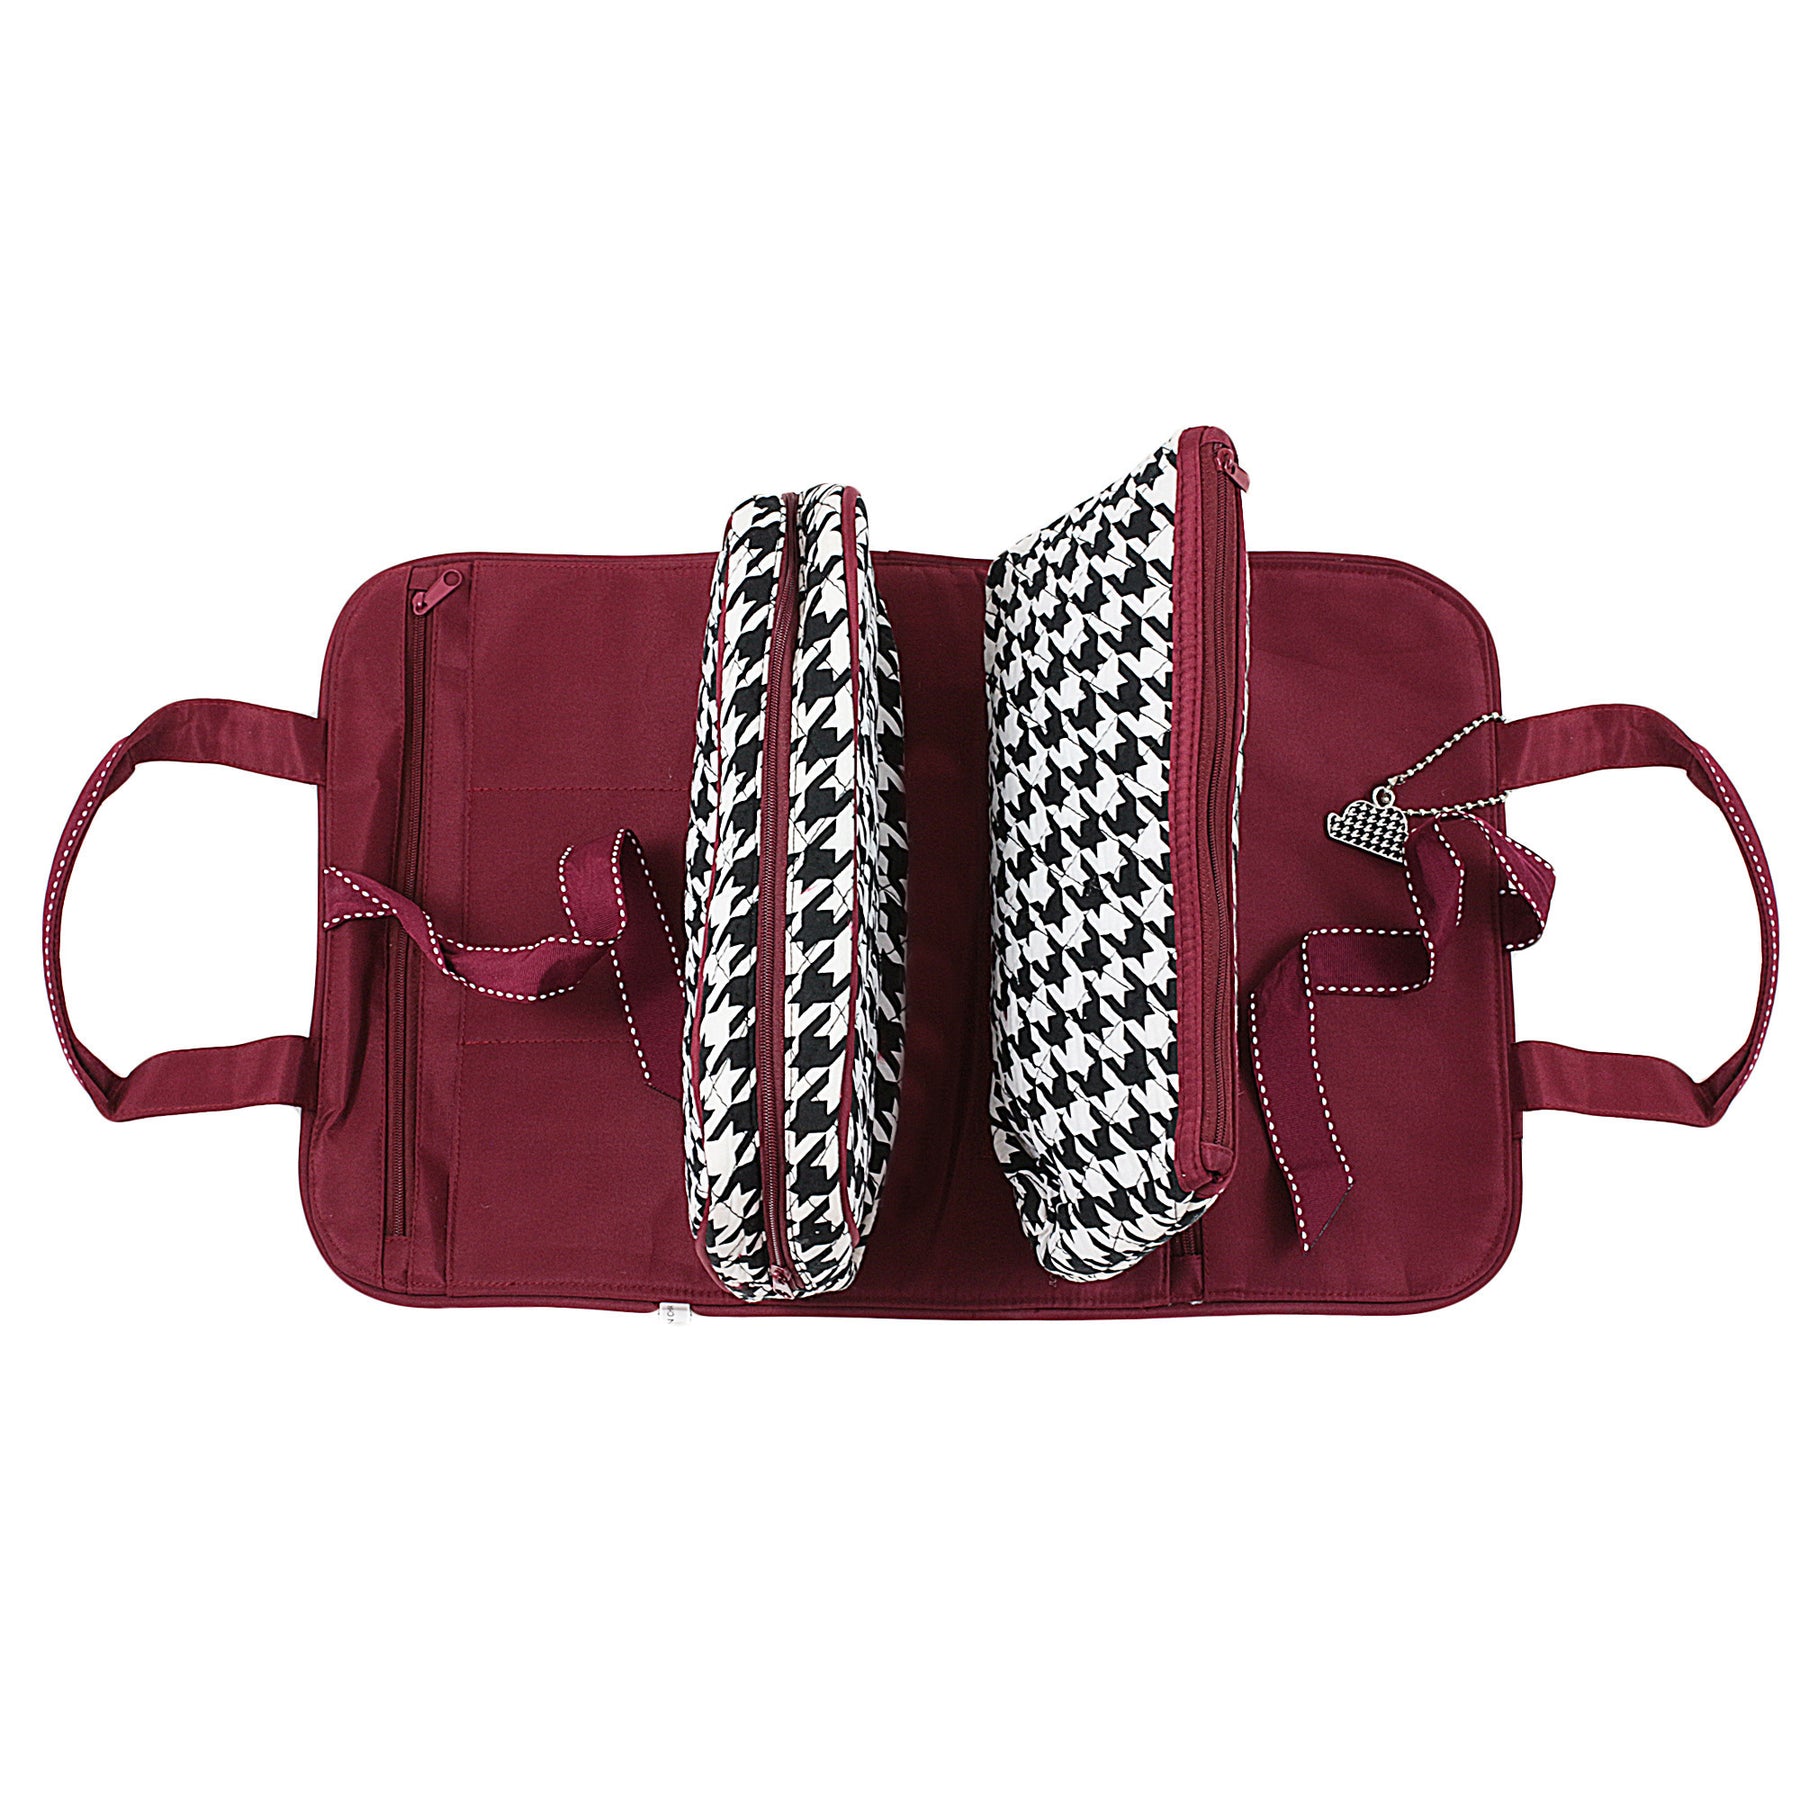 3 of 3: Houndstooth with Crimson Trim Cosmetic Duo with External Cover (Open)